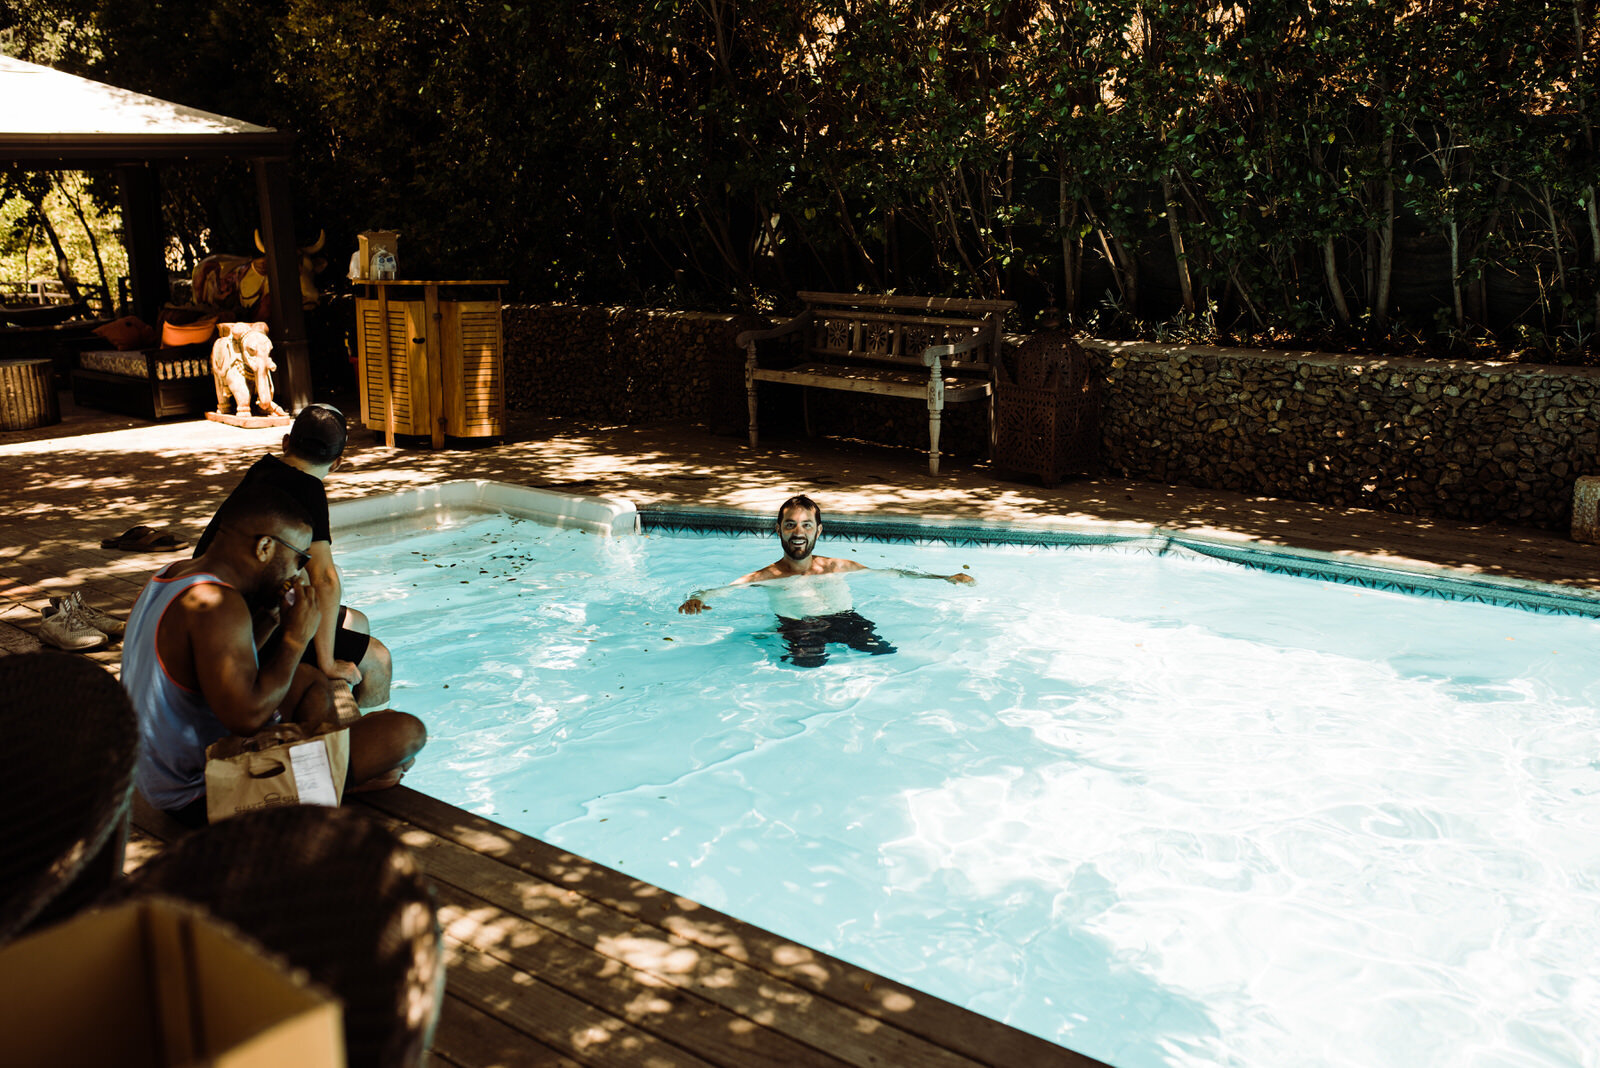 Groom Swimming in Harry Houdini Pool at Houdini Estate Wedding - candid wedding photo by Kept Record - www.keptrecord.com